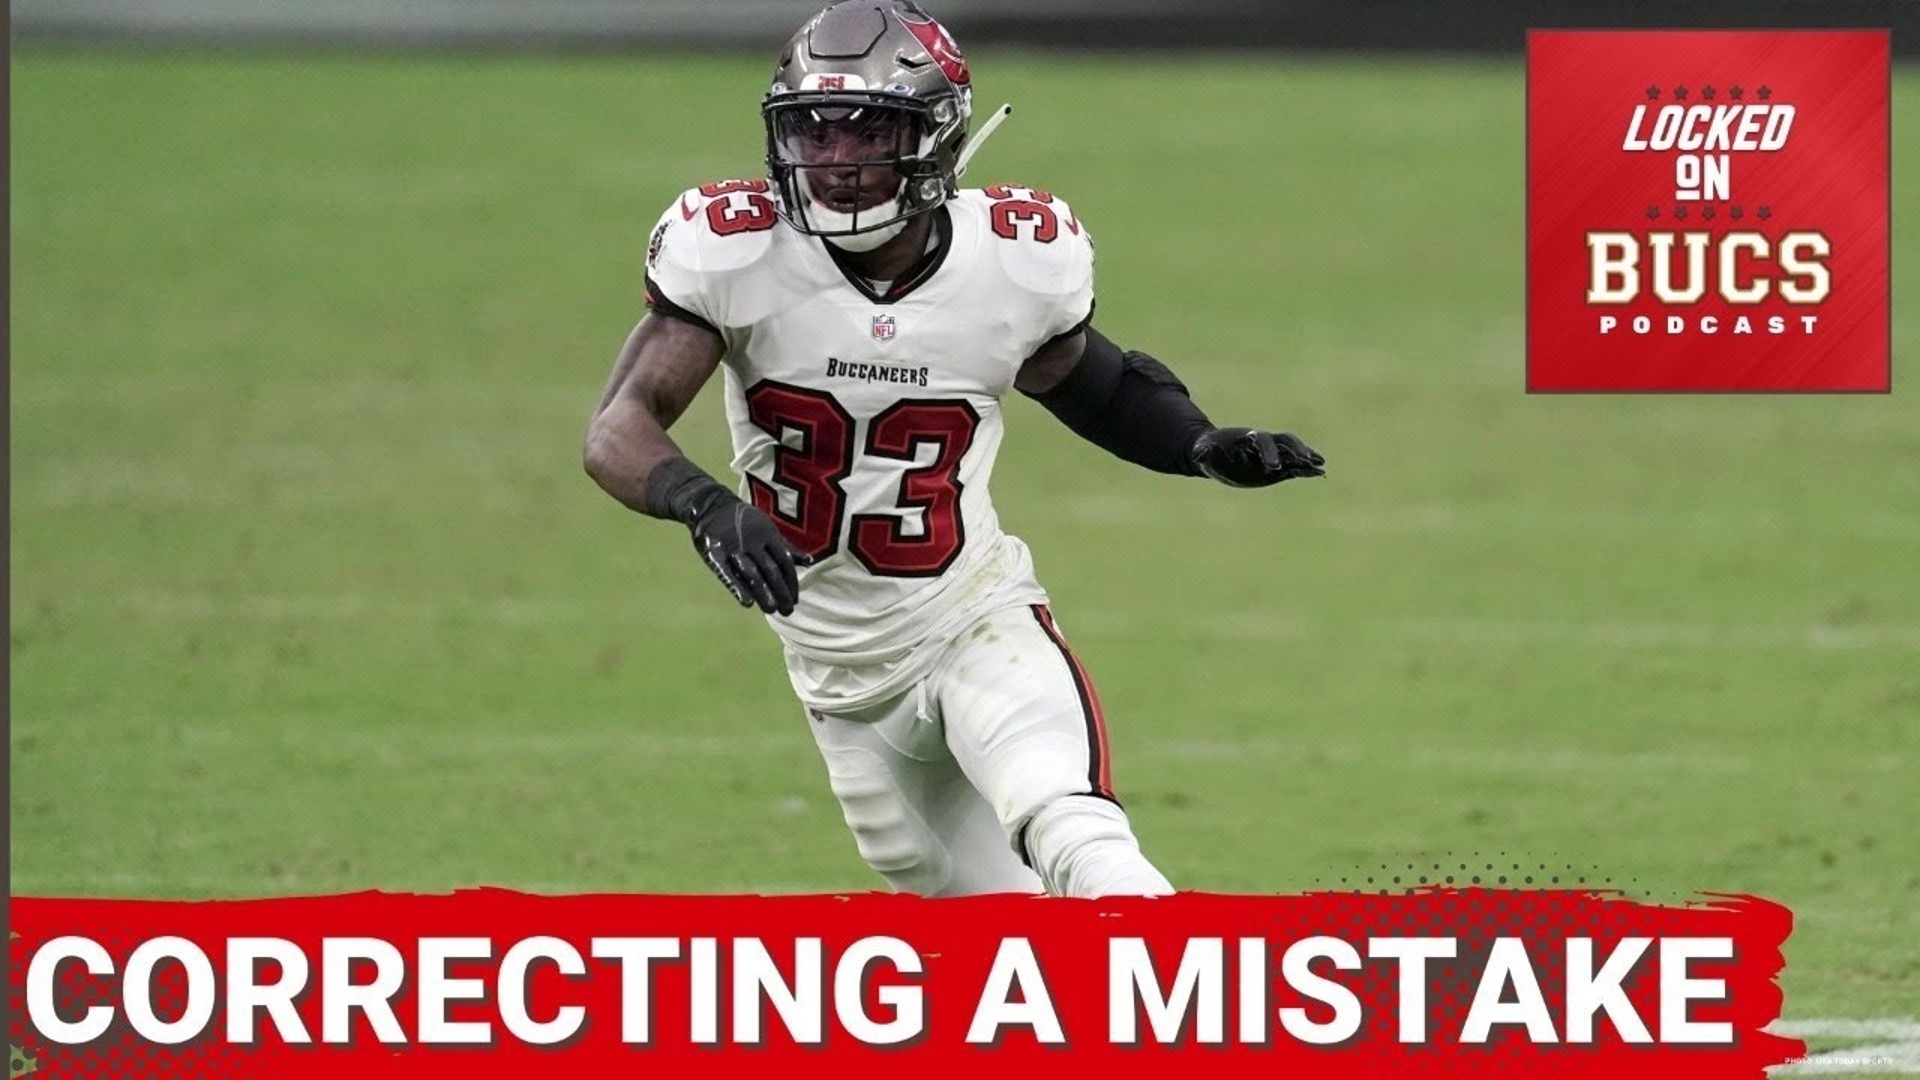 Tampa Bay Buccaneers general manager Jason Licht said on the Loose Cannons Podcast that he made a mistake letting Jordan Whitehead leave and regretted it immediately